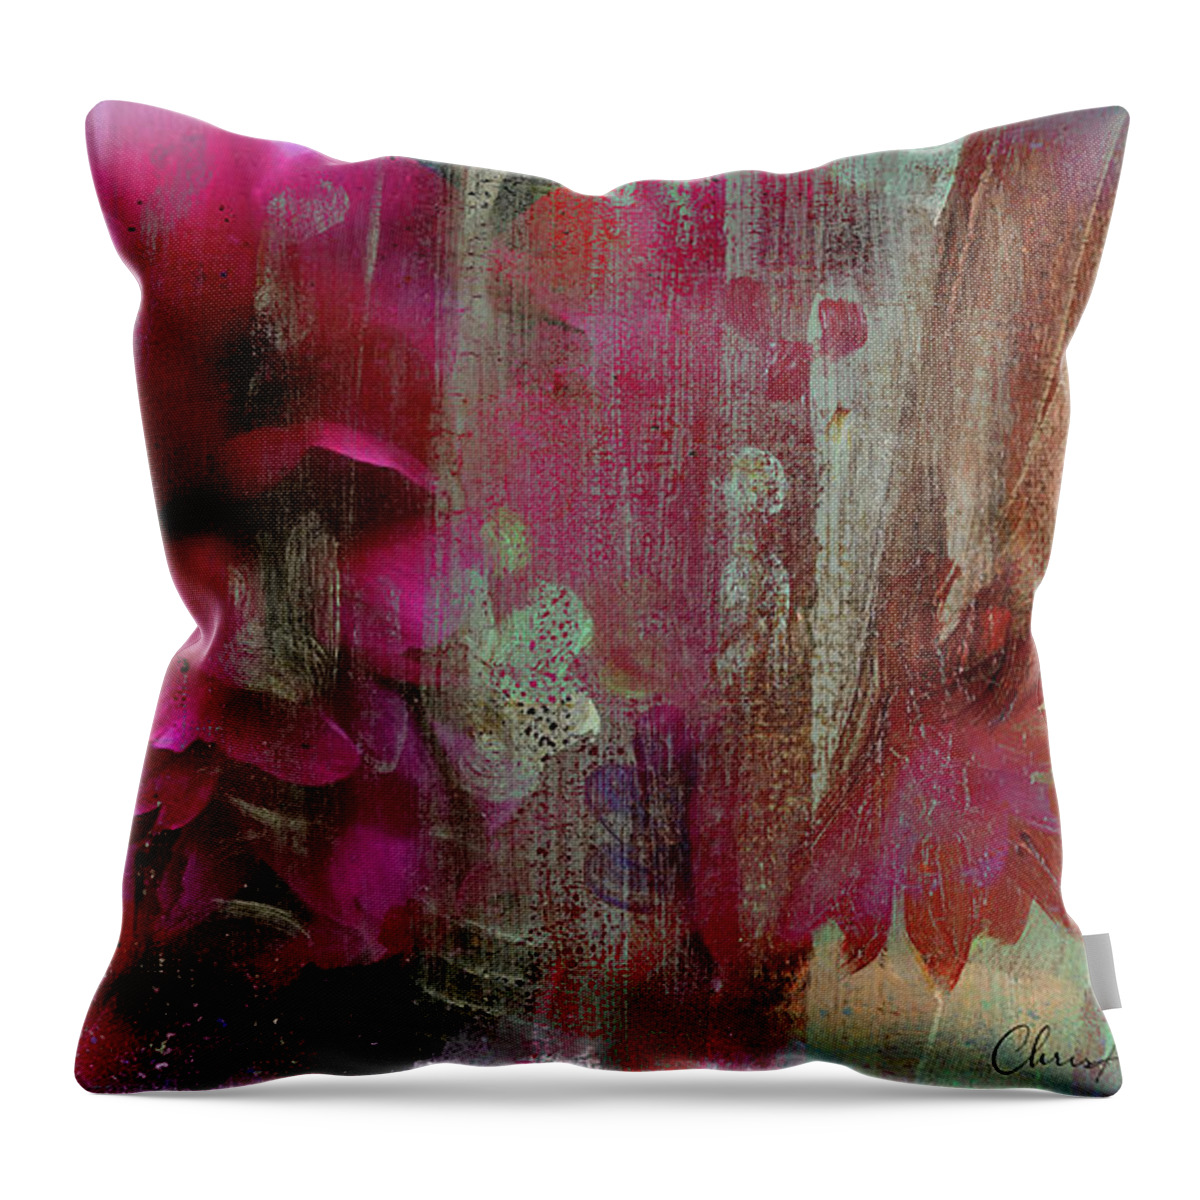 Floral Throw Pillow featuring the mixed media Painted Peonies Abstract by Chris Armytage